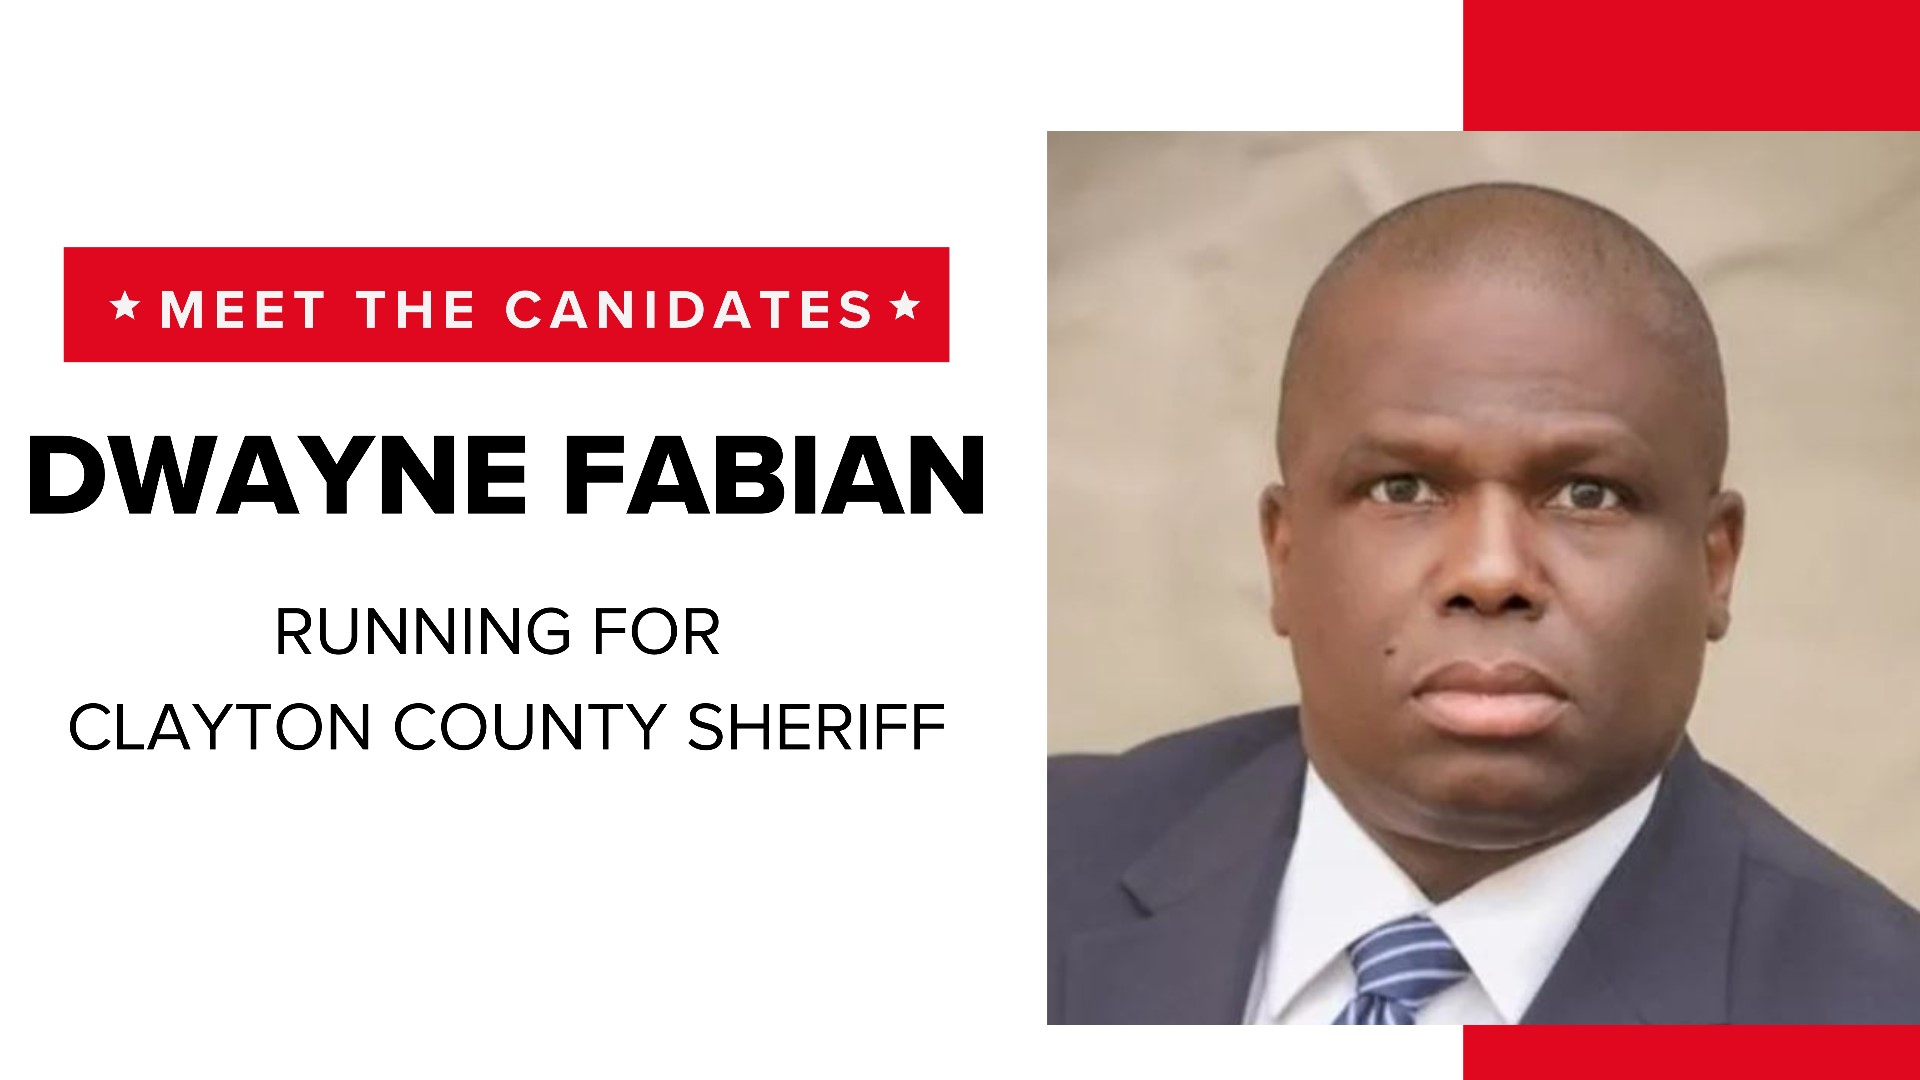 Dwayne Fabian believes he can work through the office's scrutiny and serve his neighbors in Clayton County.